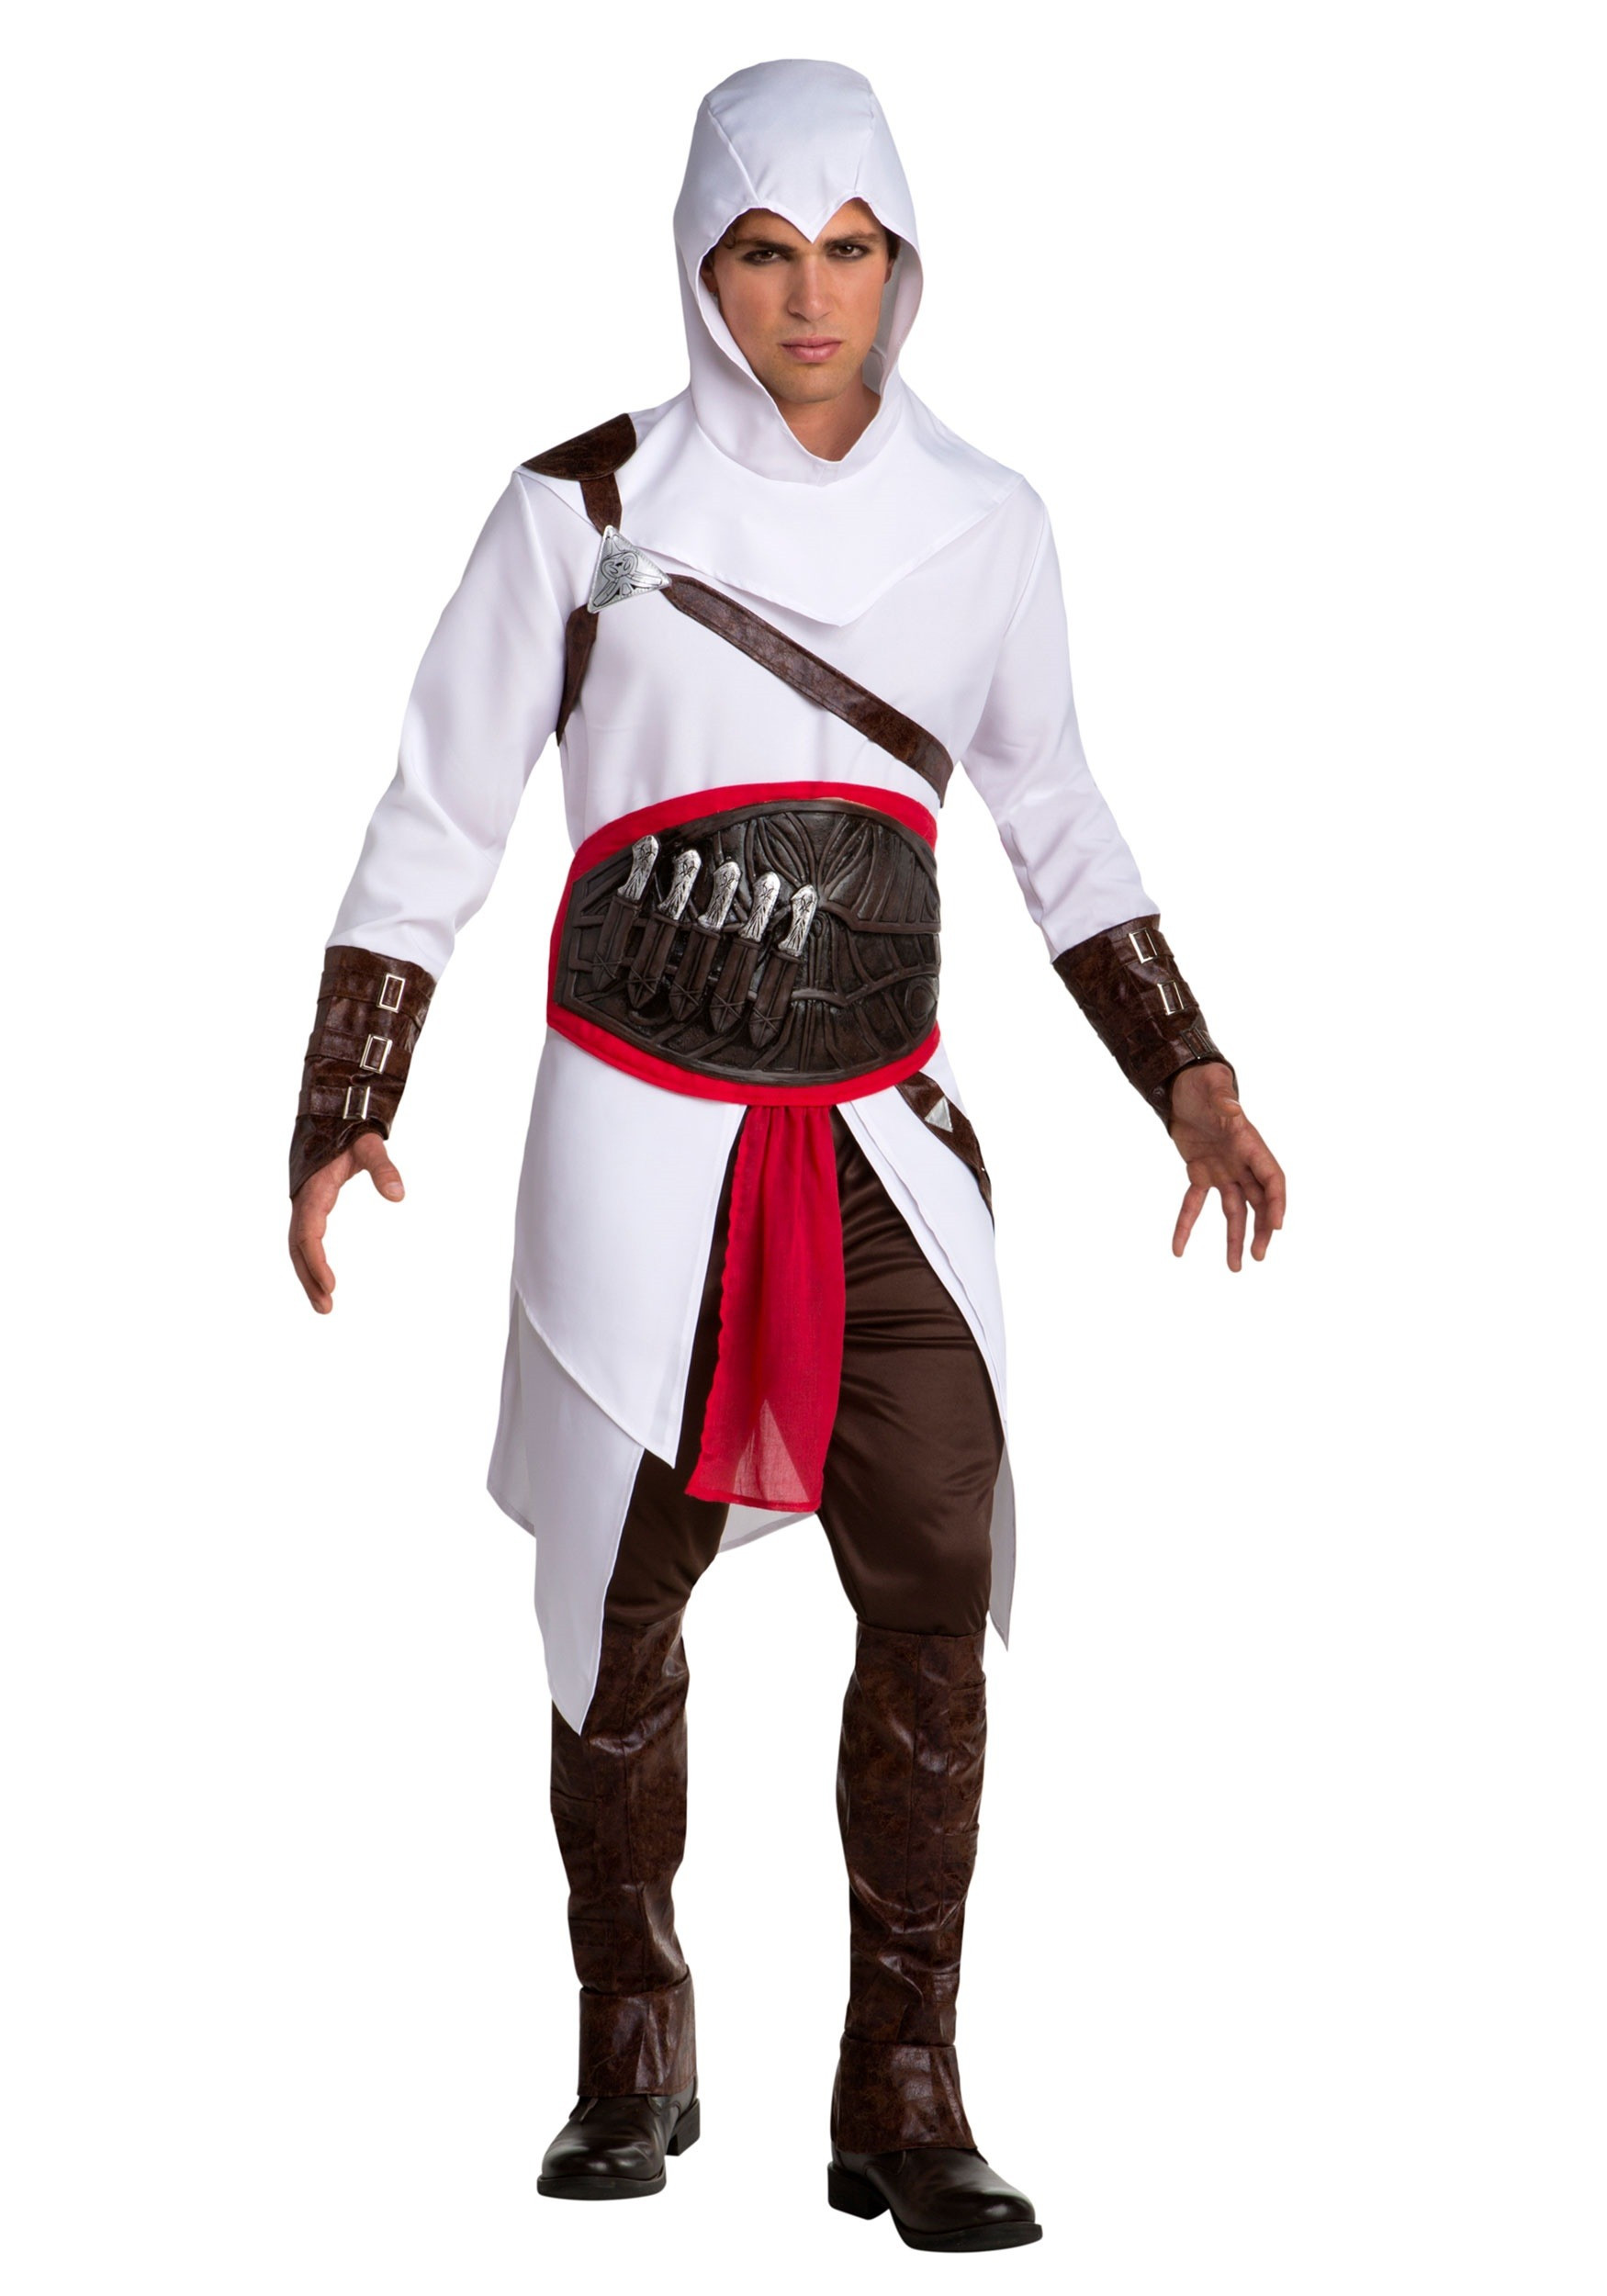 DIY Assassins Creed Costume
 Assassin s Creed Altair Mens Costume for Men